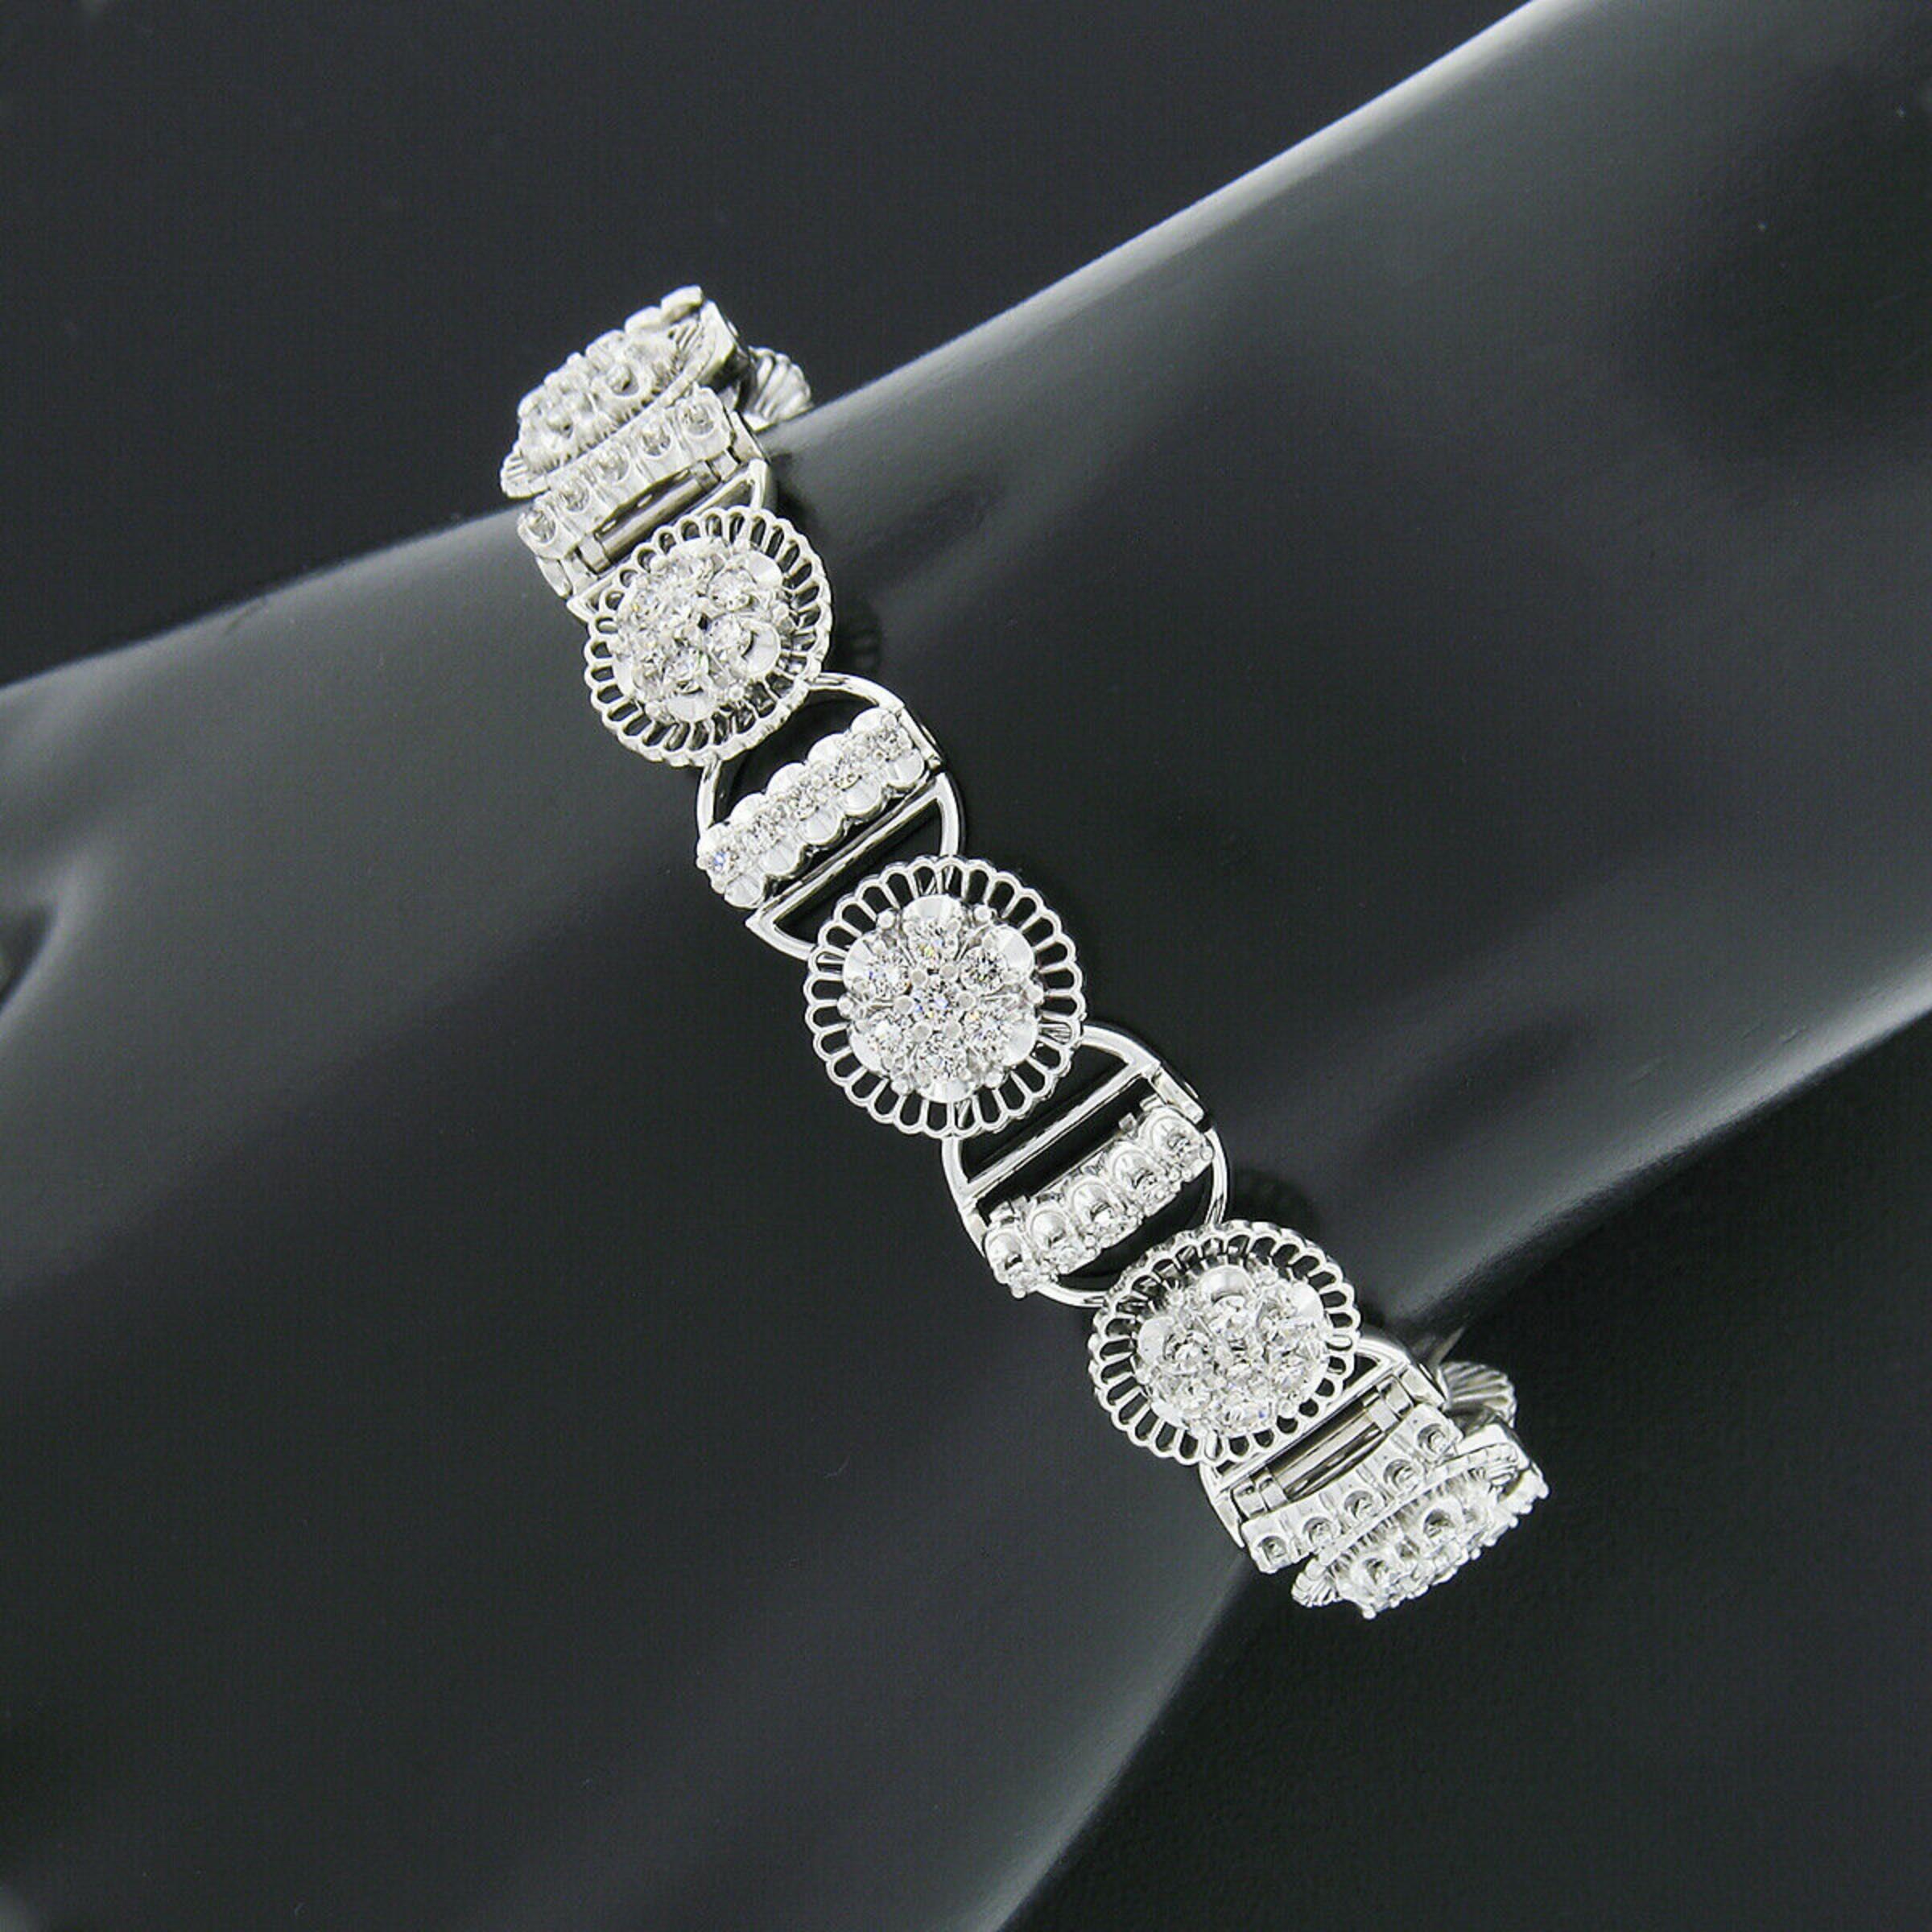 Here we have a vintage Jabel tennis bracelet that was crafted from solid 18k white gold and features fine diamonds set throughout each individual link. The bracelet carries 120 single cut diamonds which are neatly set in flower clusters and also